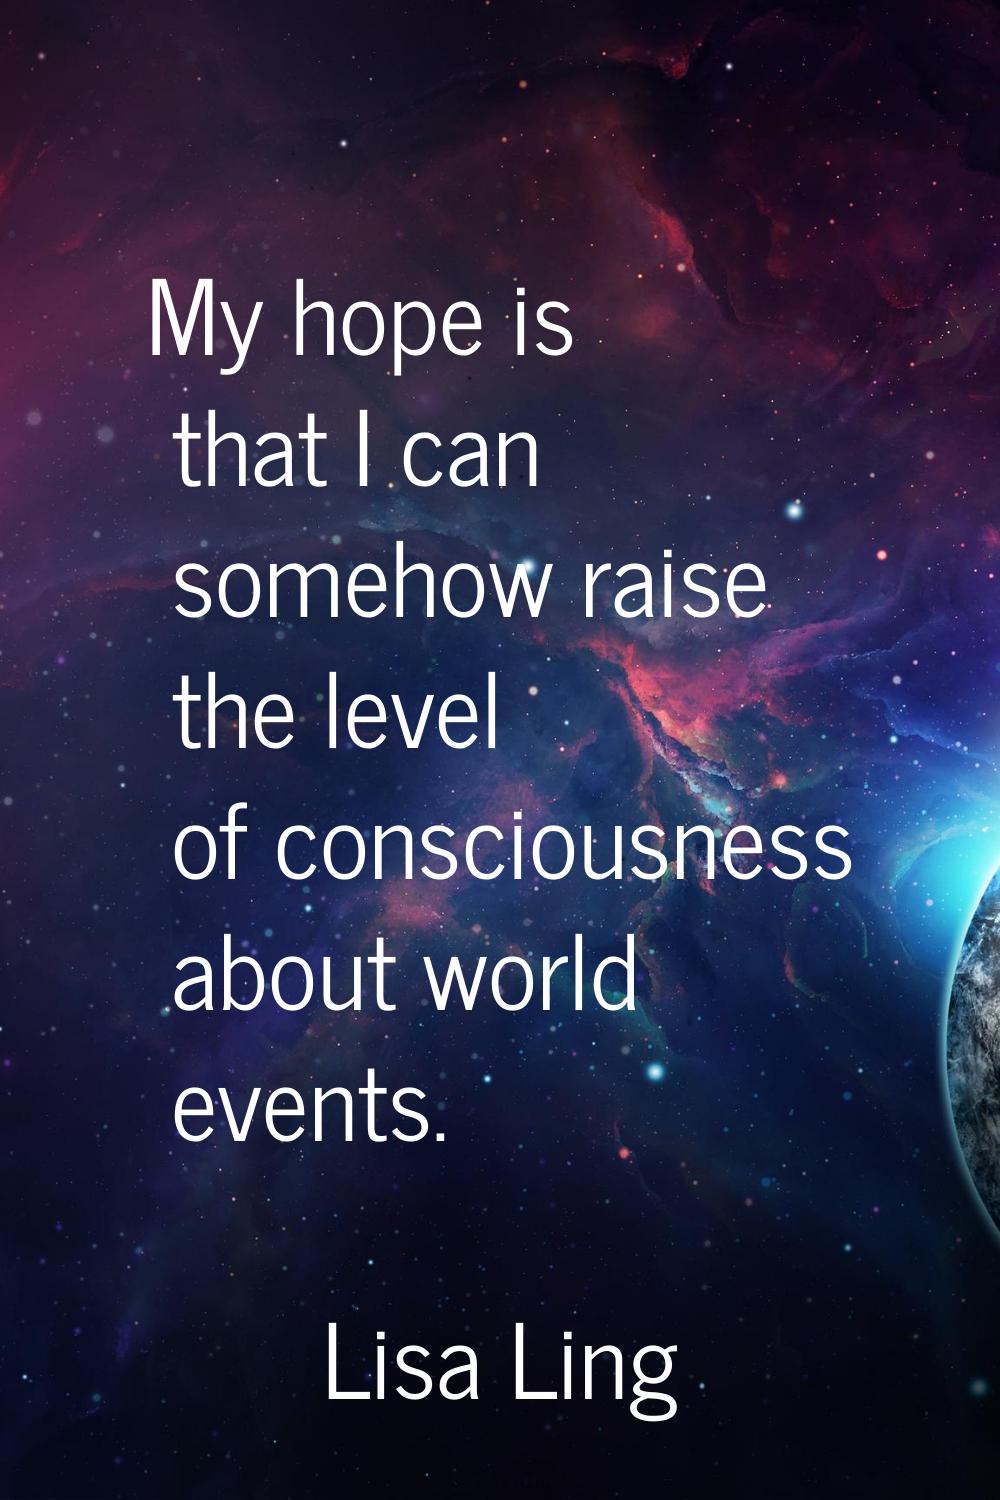 My hope is that I can somehow raise the level of consciousness about world events.